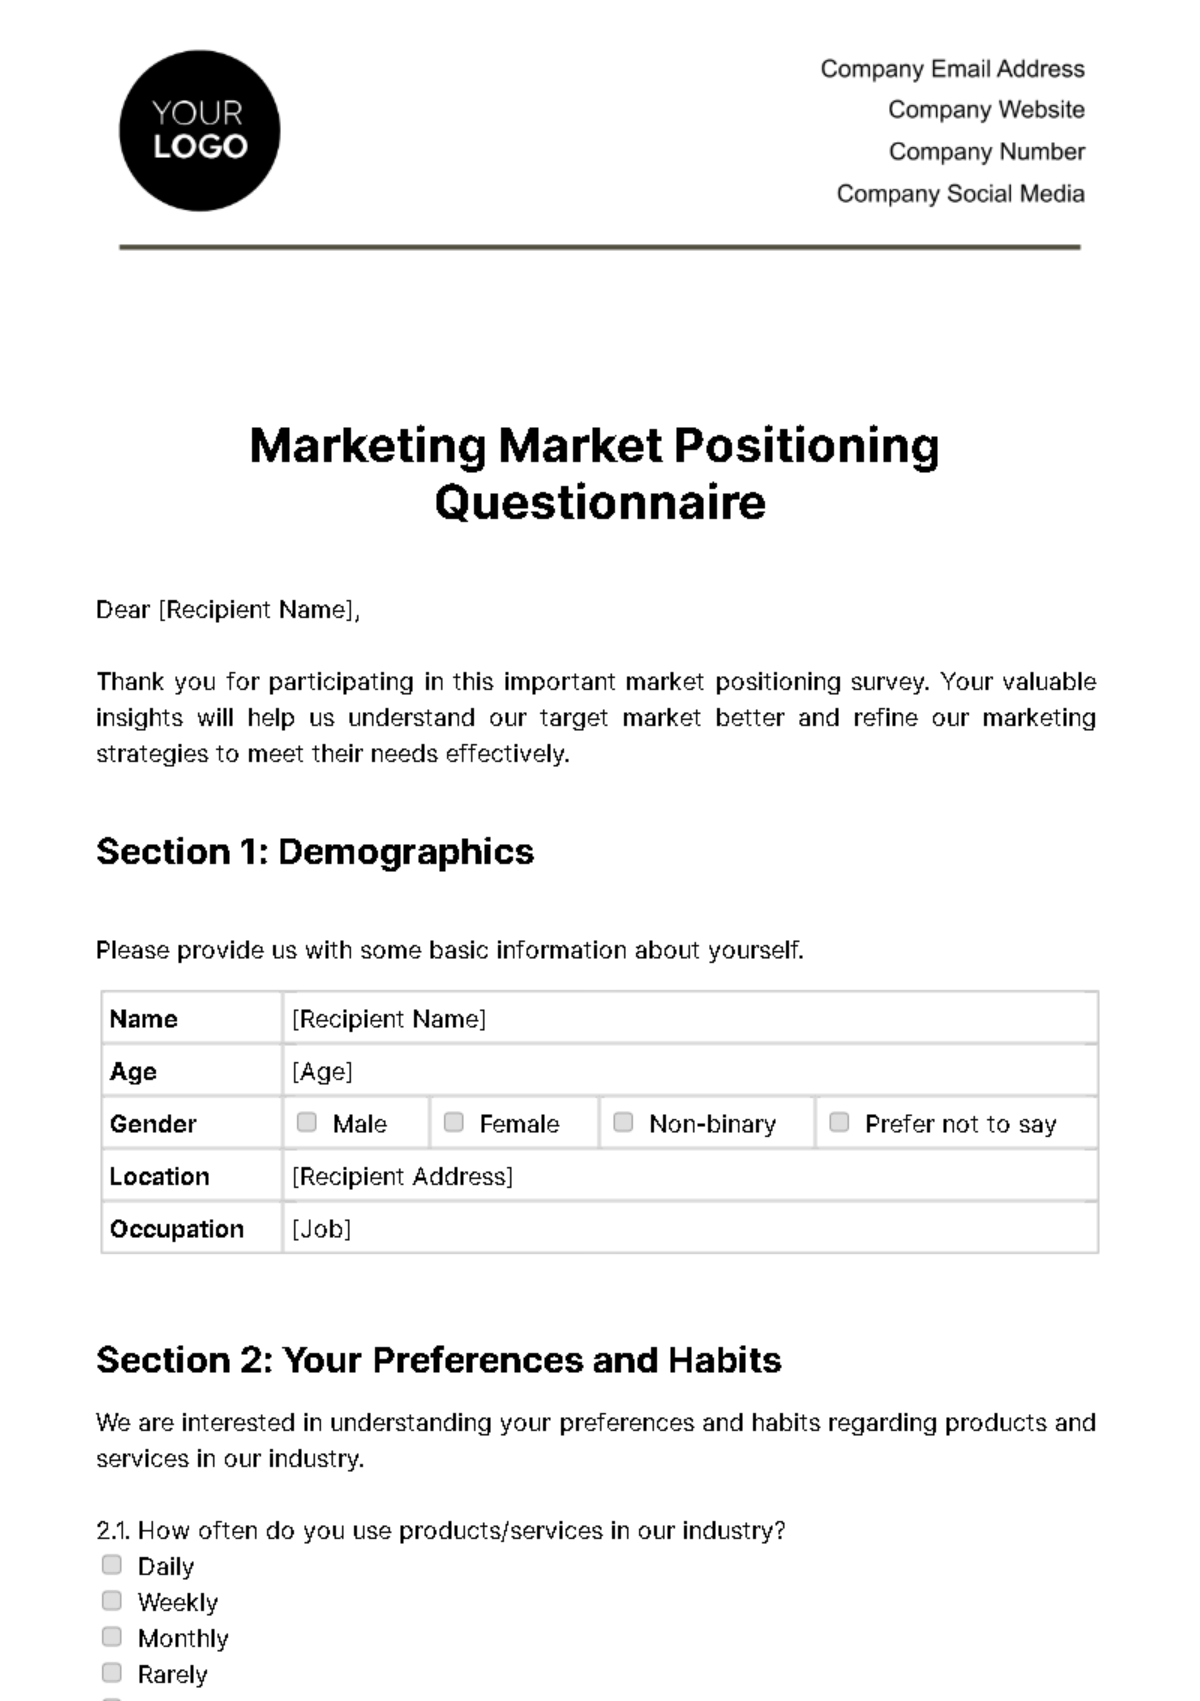 Free Marketing Market Positioning Questionnaire Template